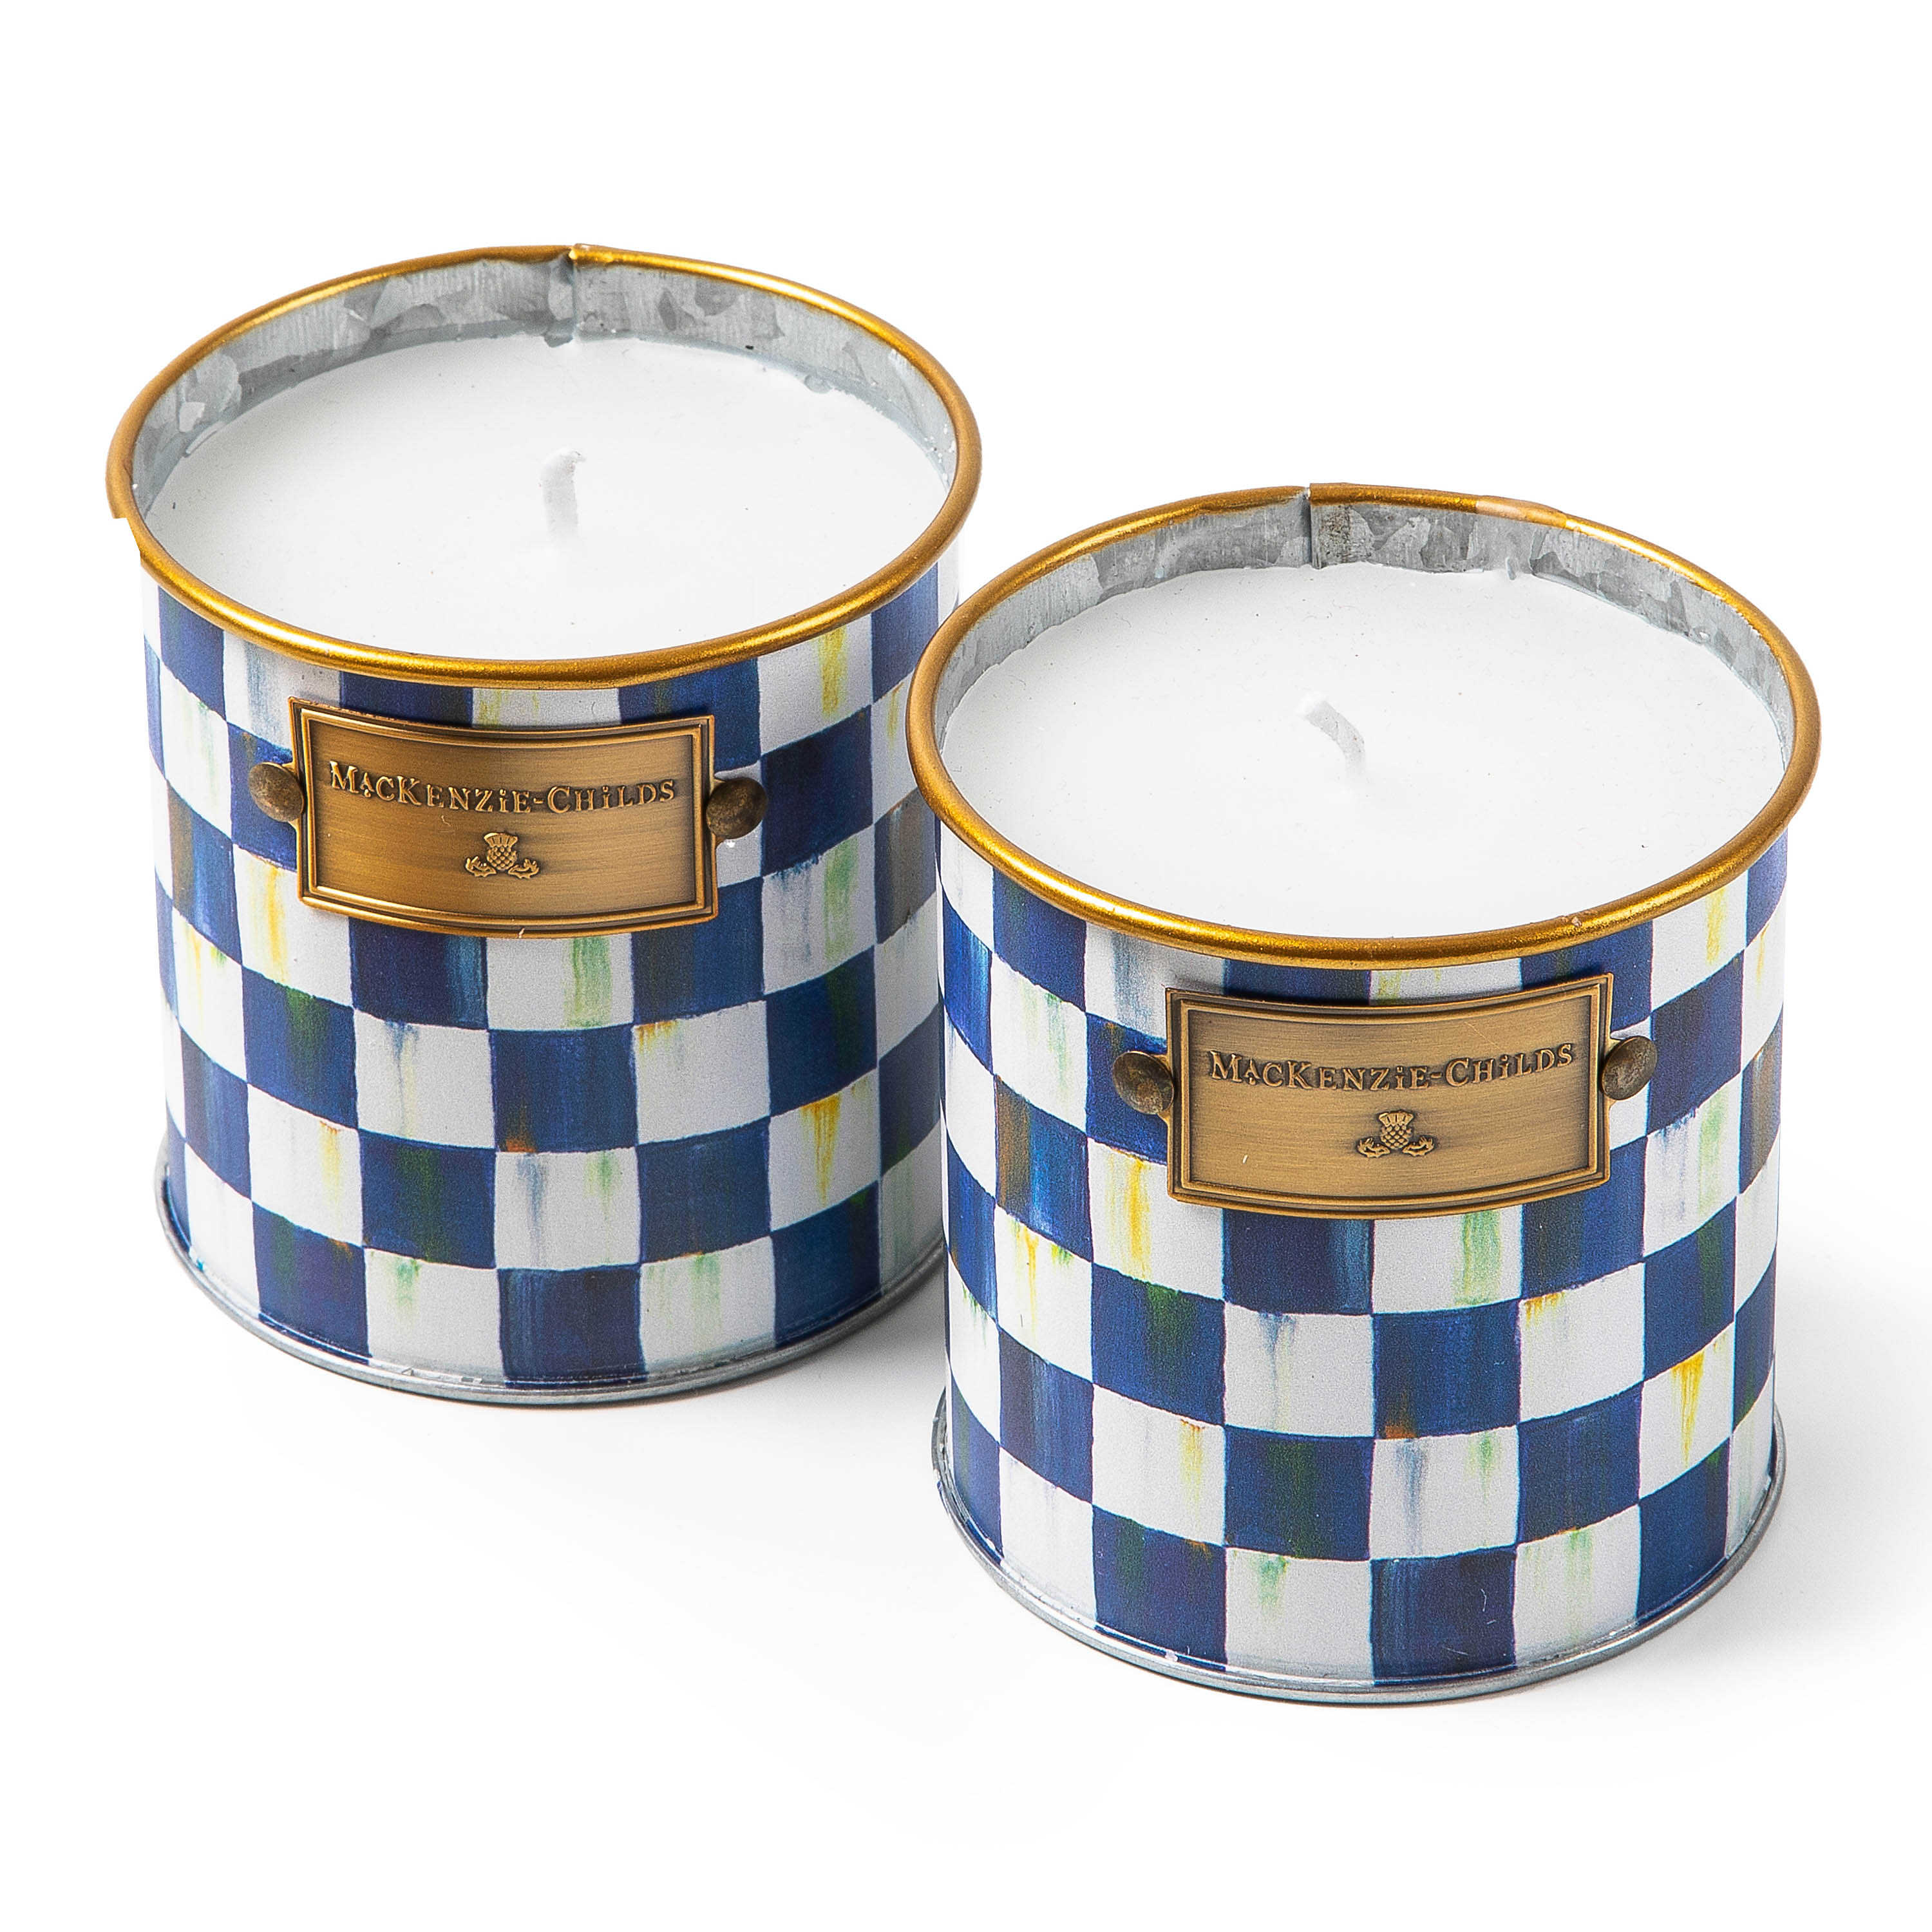 Royal Check Small Citronella Candles, Set of 2 mackenzie-childs Panama 0